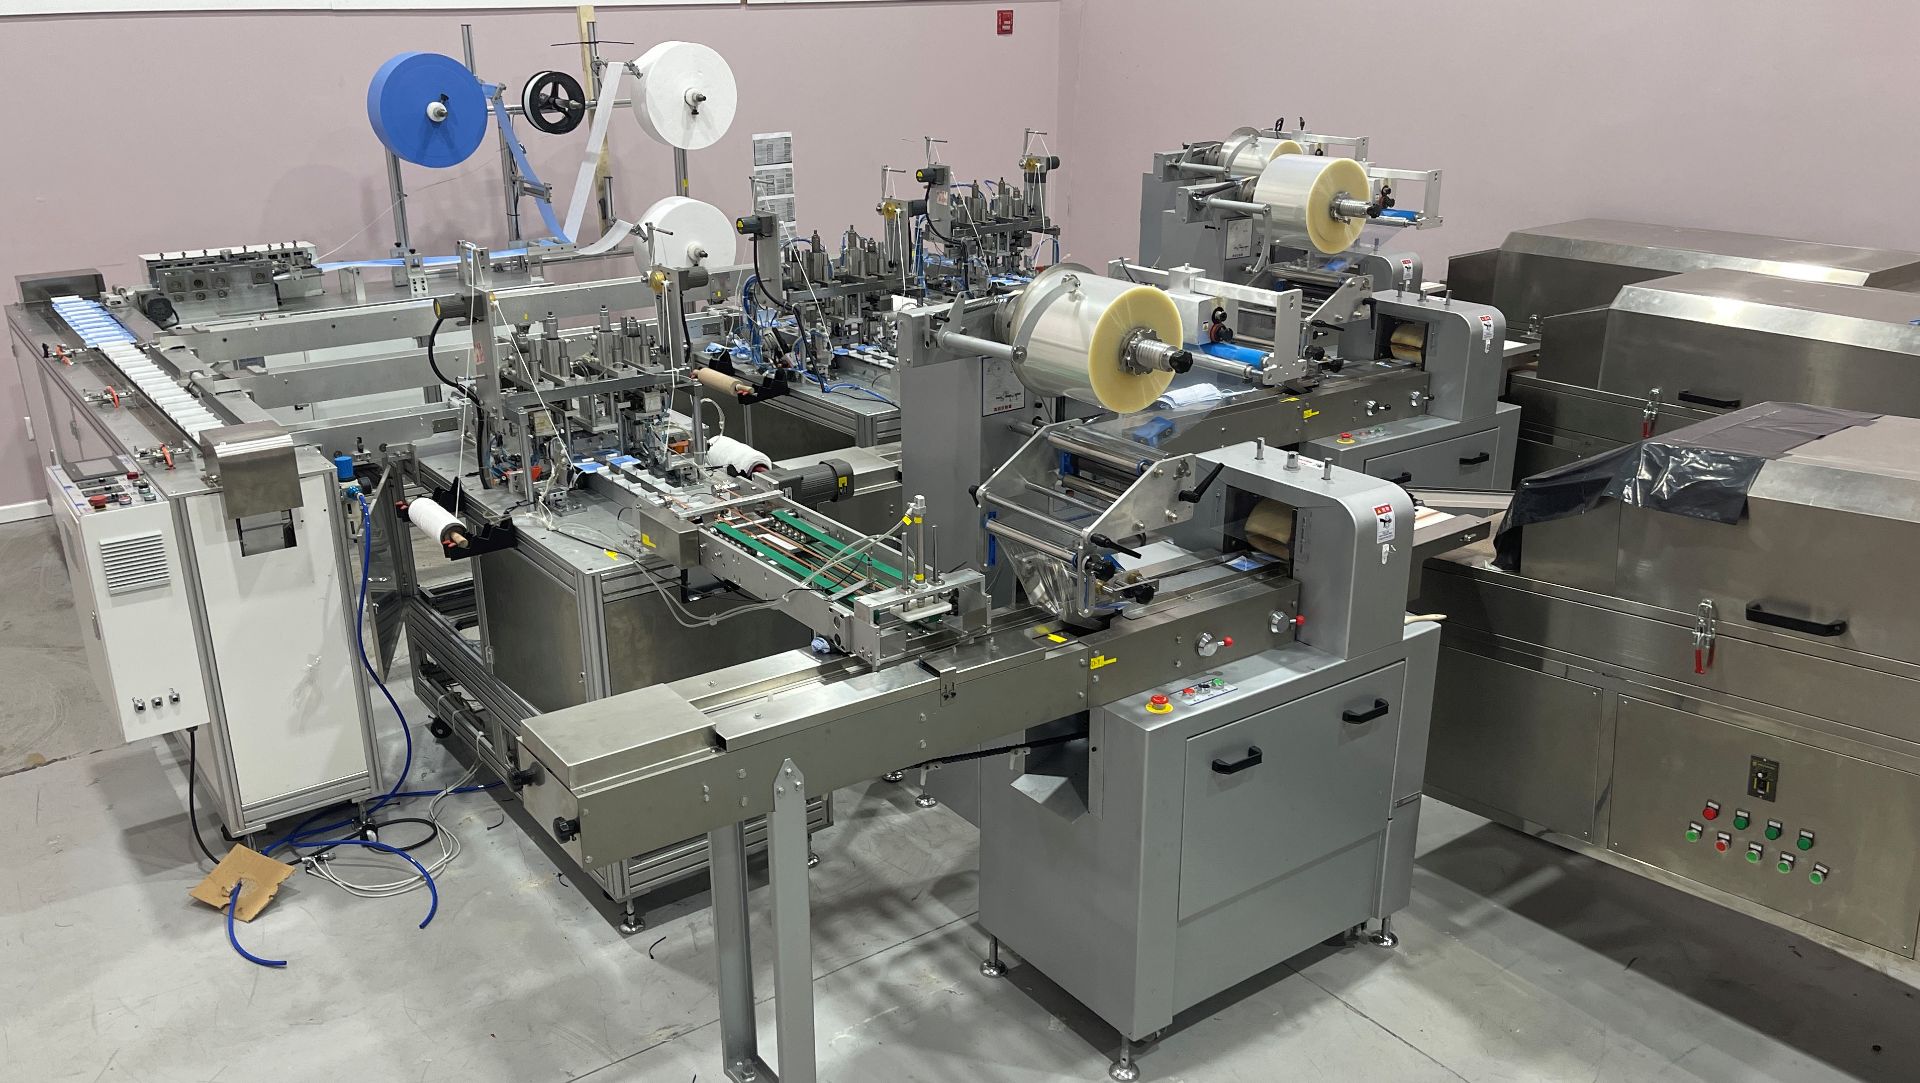 COMPLETE PACKAGE: 2020 3-Ply Disposable Medical Mask Assembly & Packaging Line Equipment, Includes: - Image 6 of 150